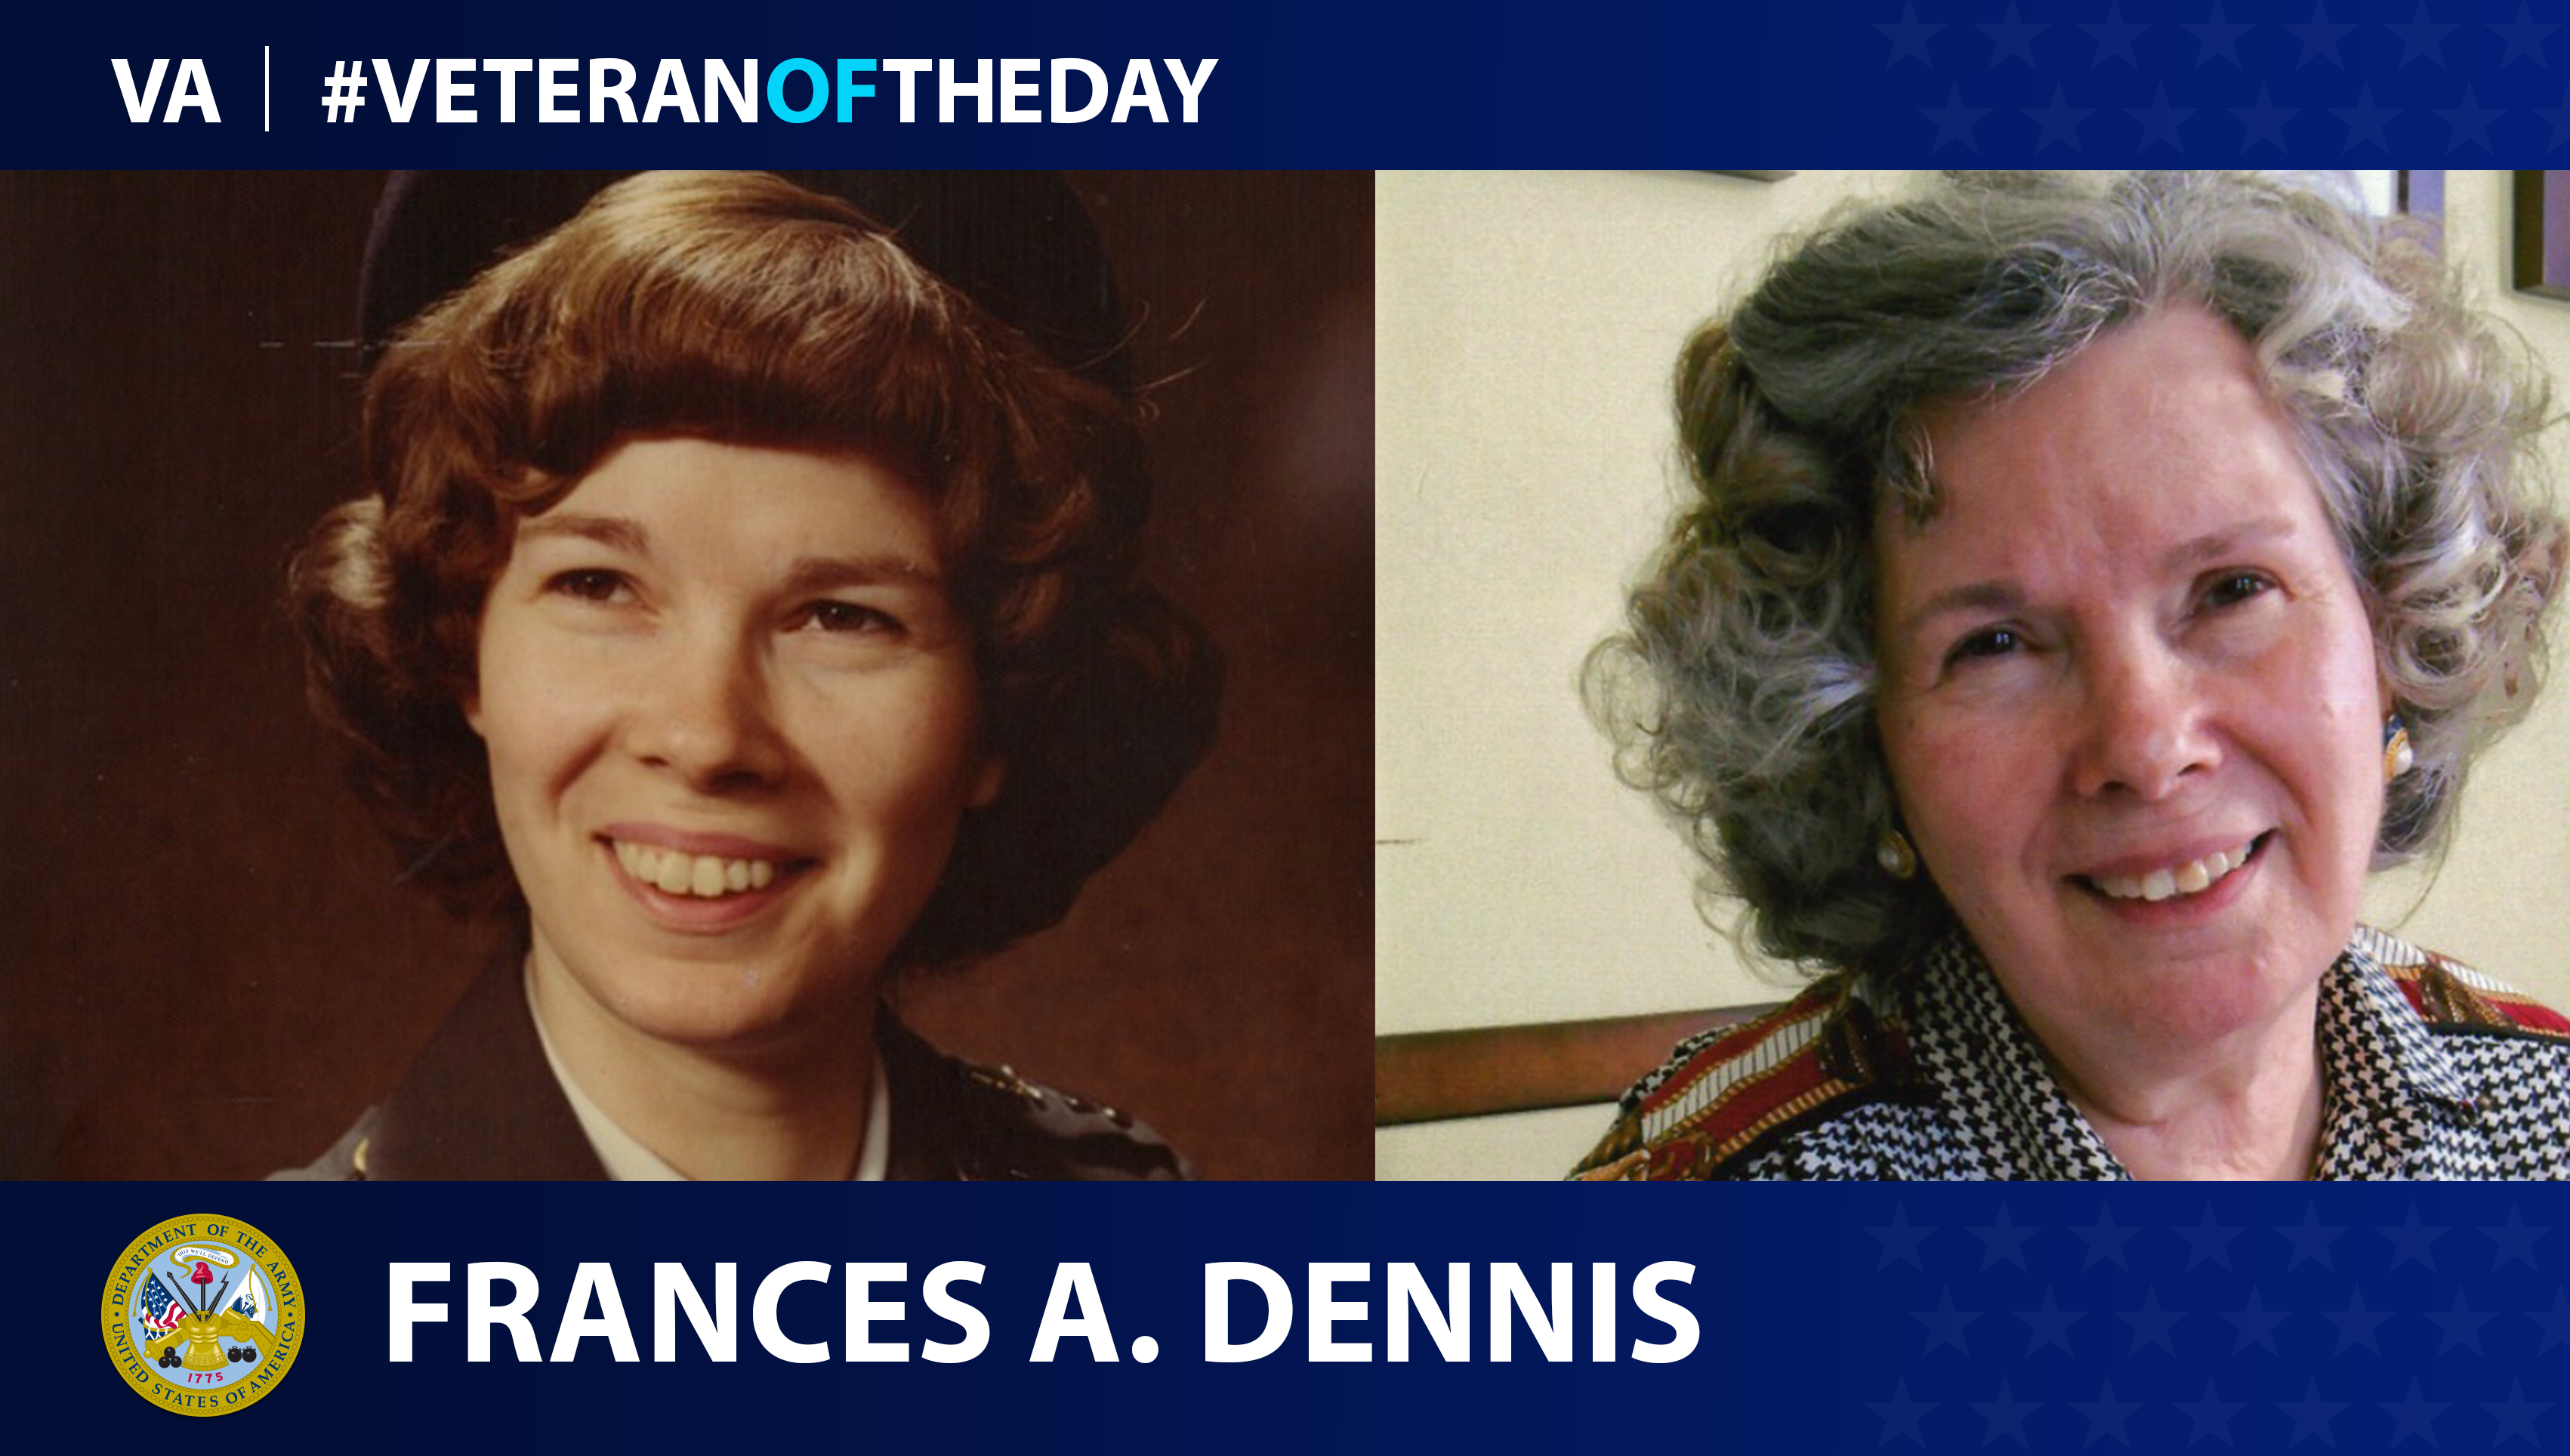 Army Veteran Frances A. Dennis is today's Veteran of the Day.